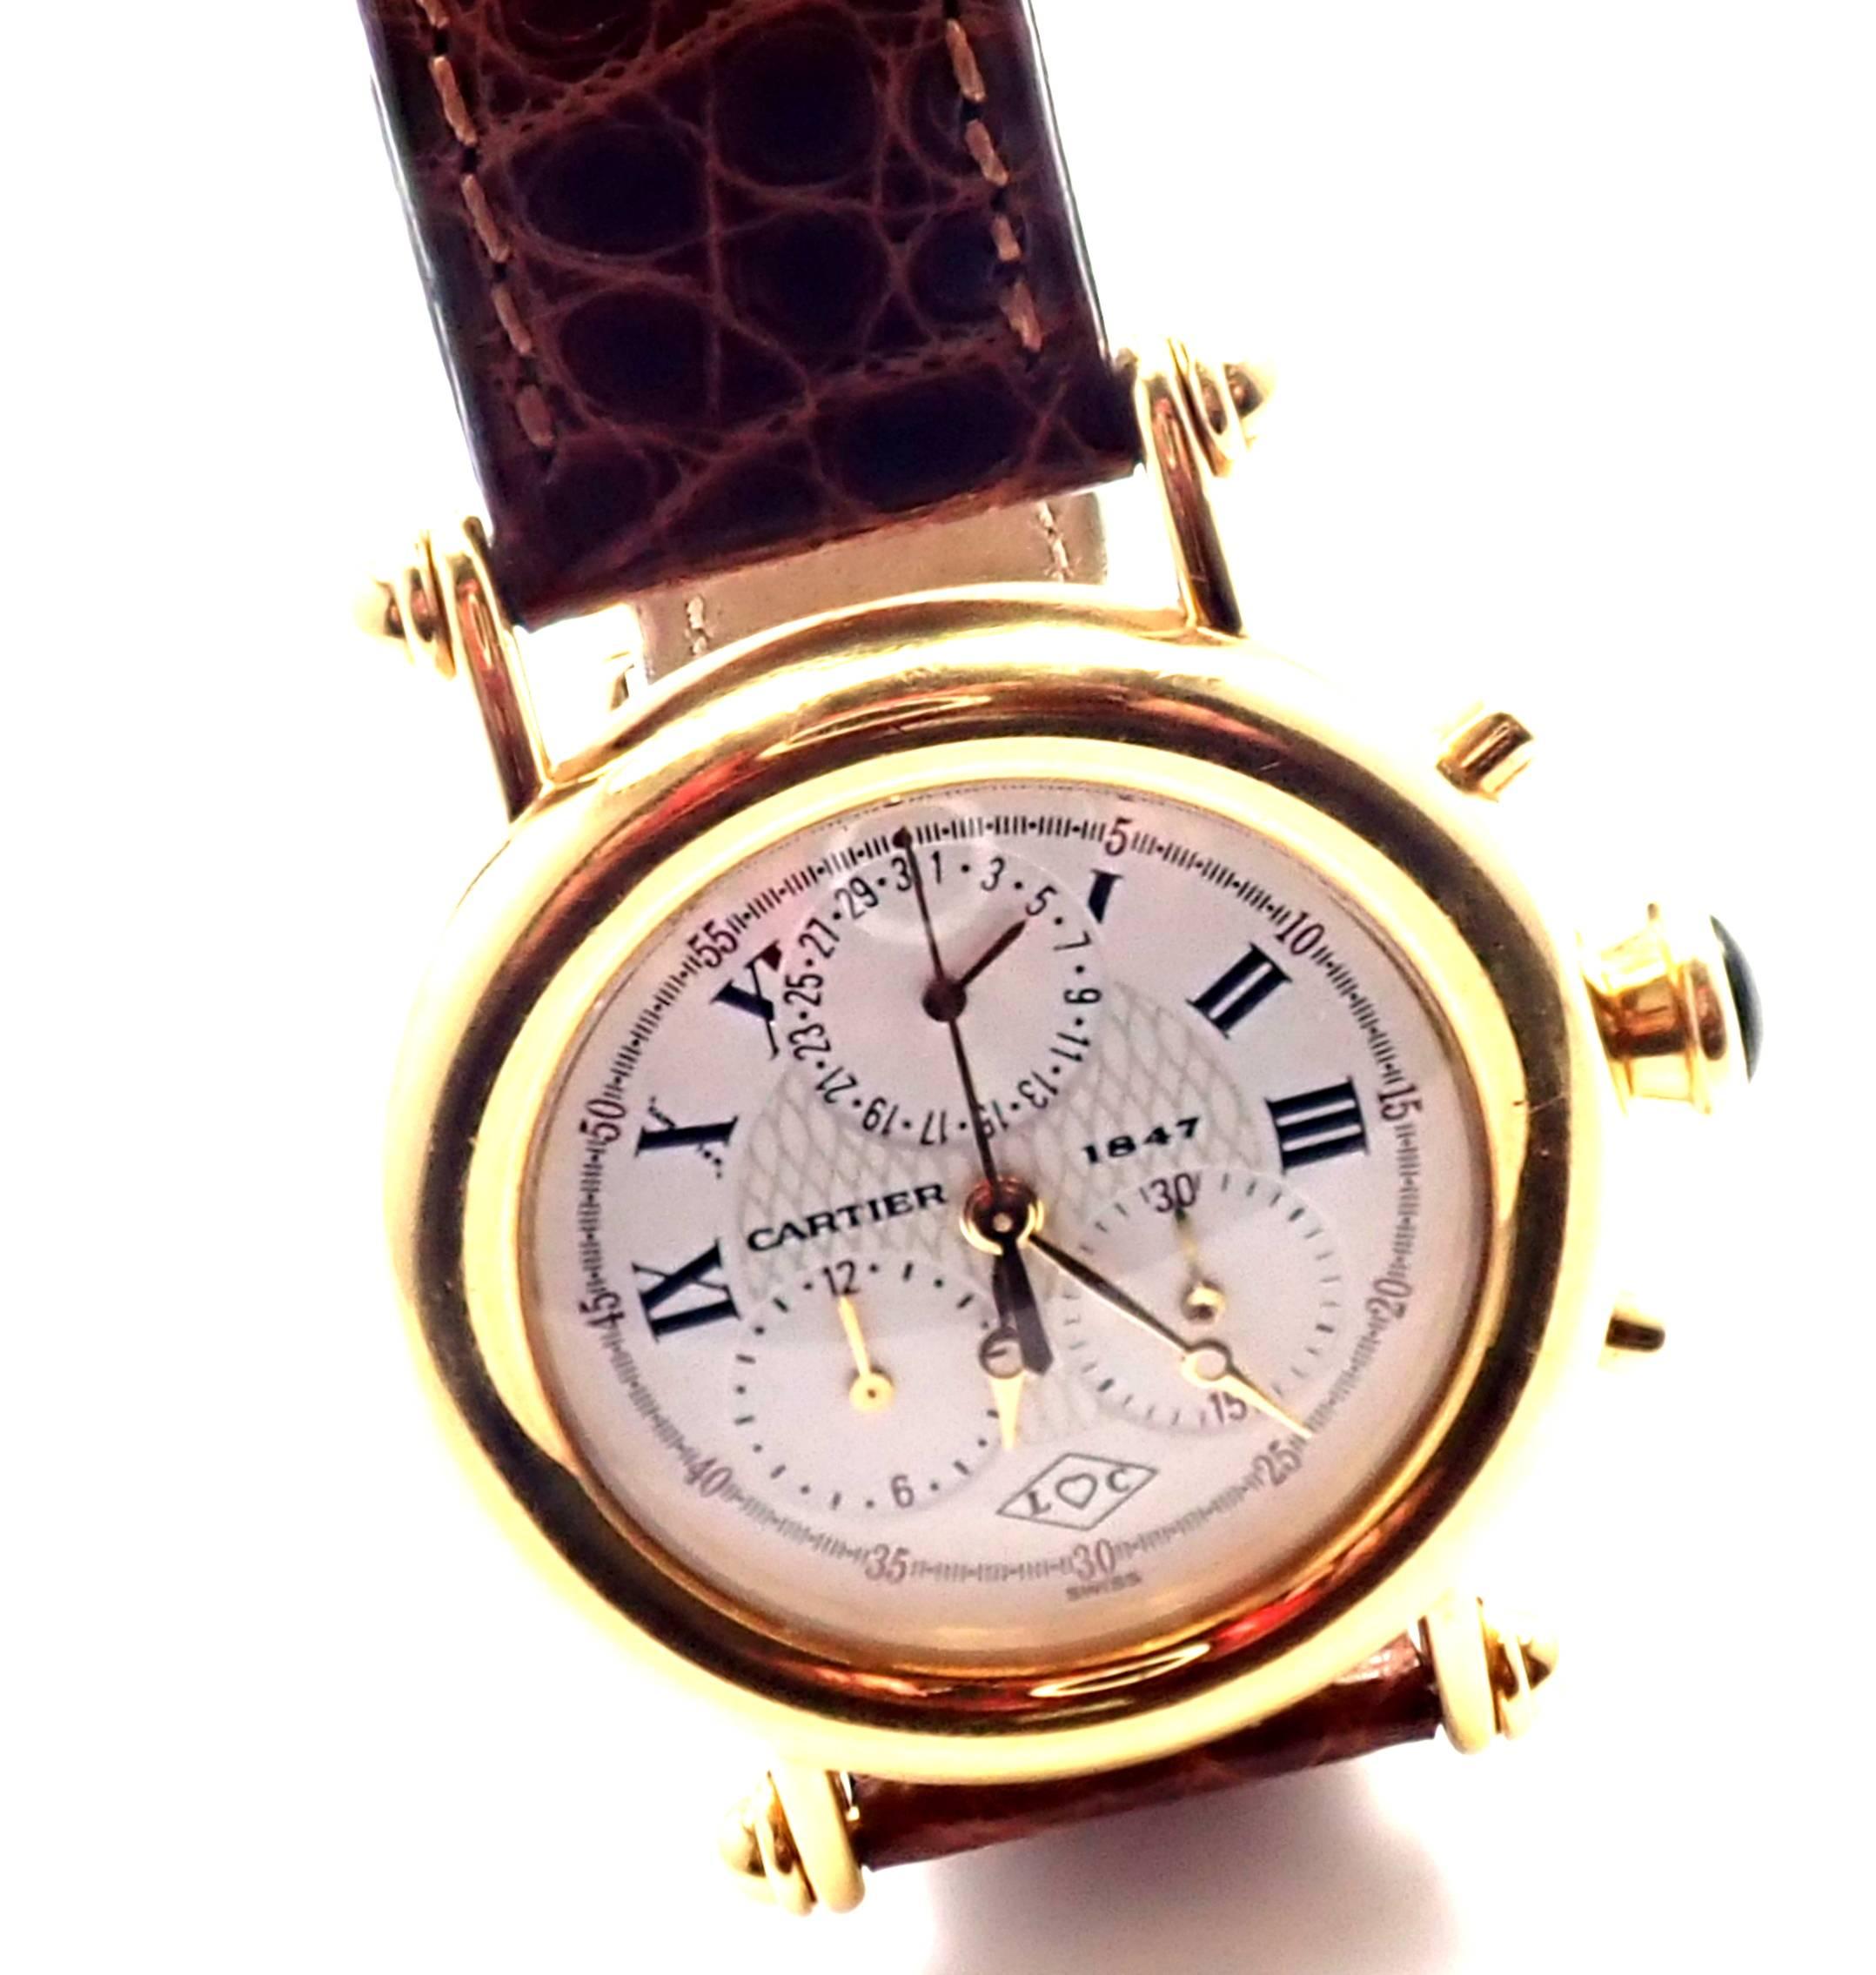 18k Yellow Gold 1847 Diabolo Chronograph Quartz Wristwatch by Cartier. 
Cartier Diabolo 1400 Chronograph 18k yellow gold. 
32mm yellow gold case. 
Cream dial with gold subdials and markers. 
Original Cartier brown leather band with 18k yellow gold